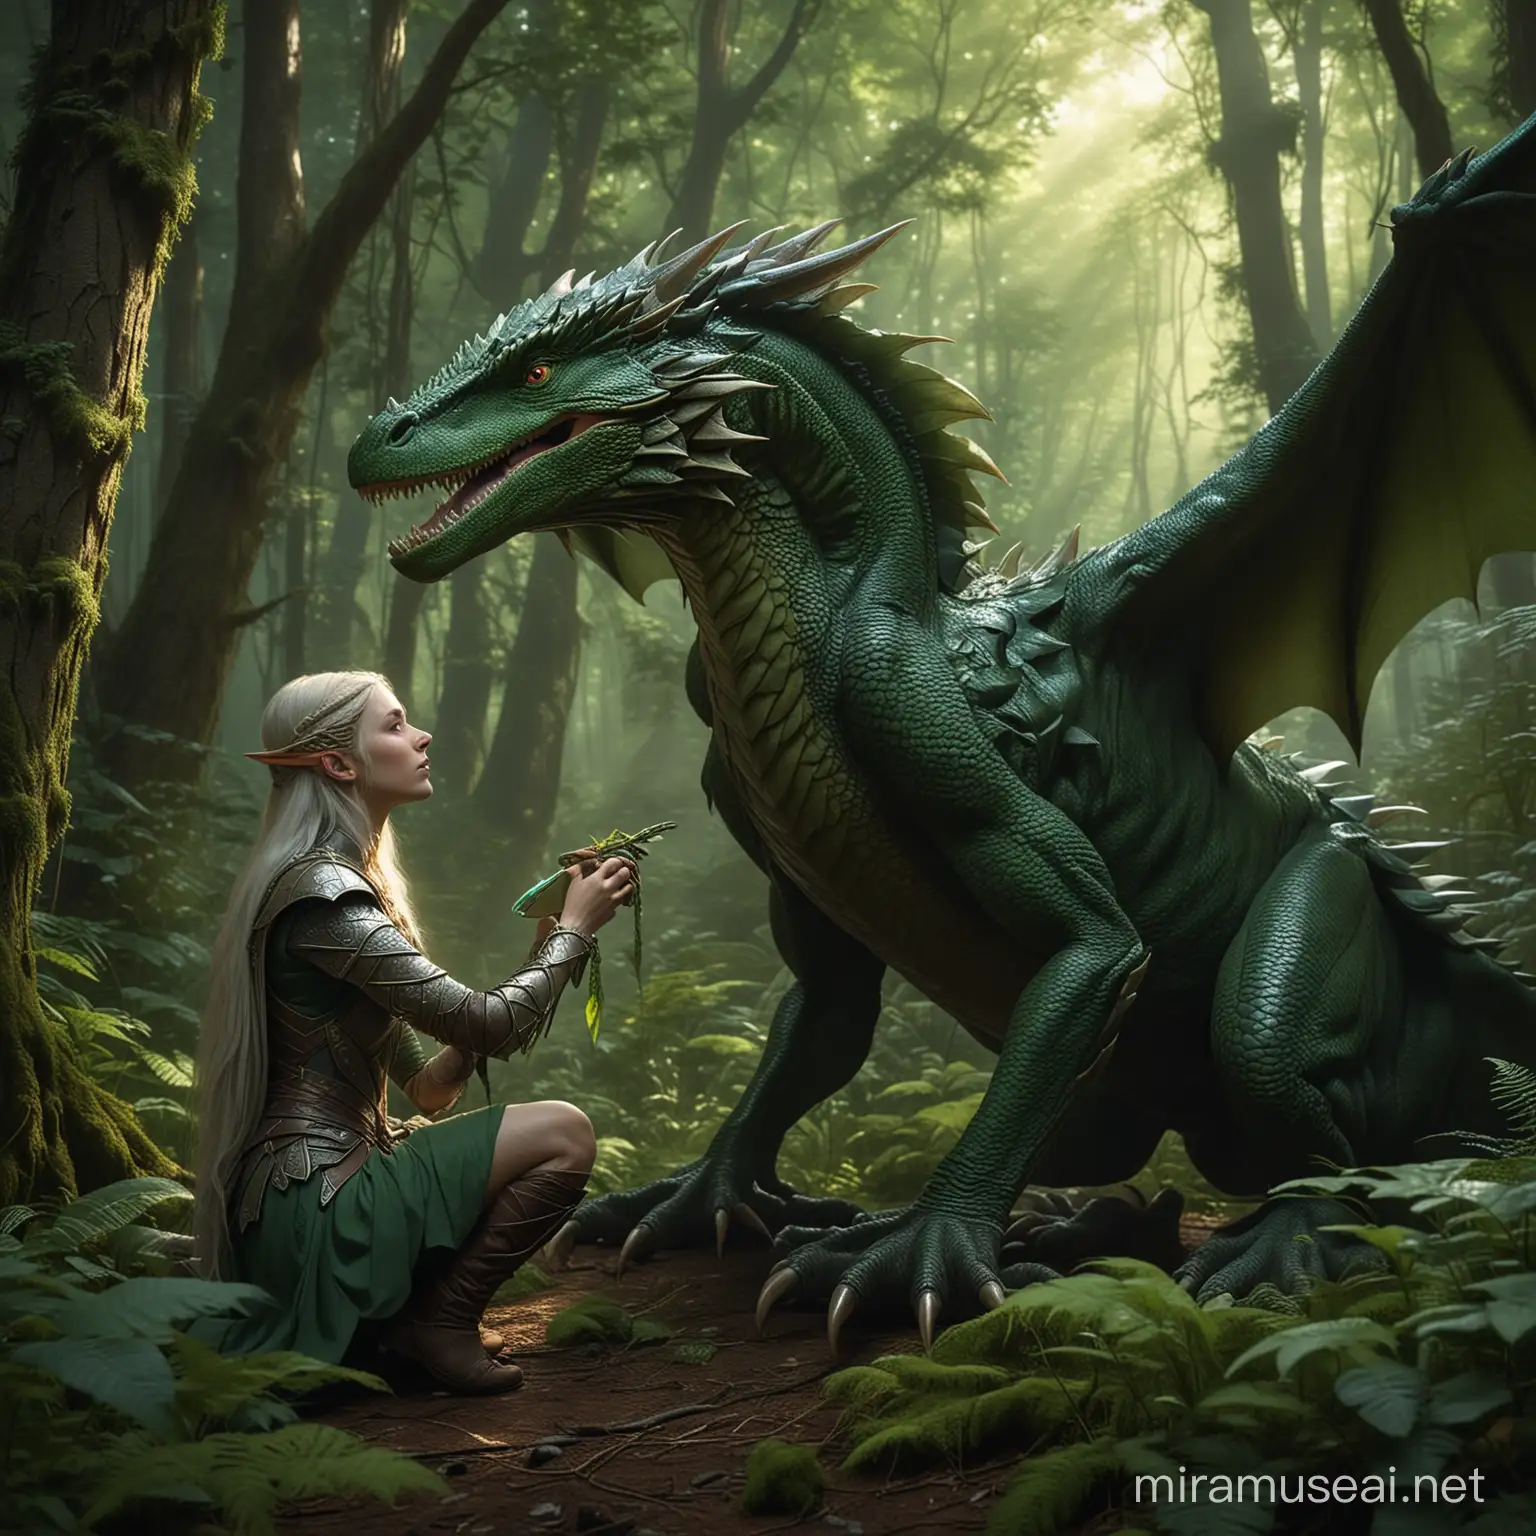 Elven Warrior Petting Green Drake in Forest Ambiance